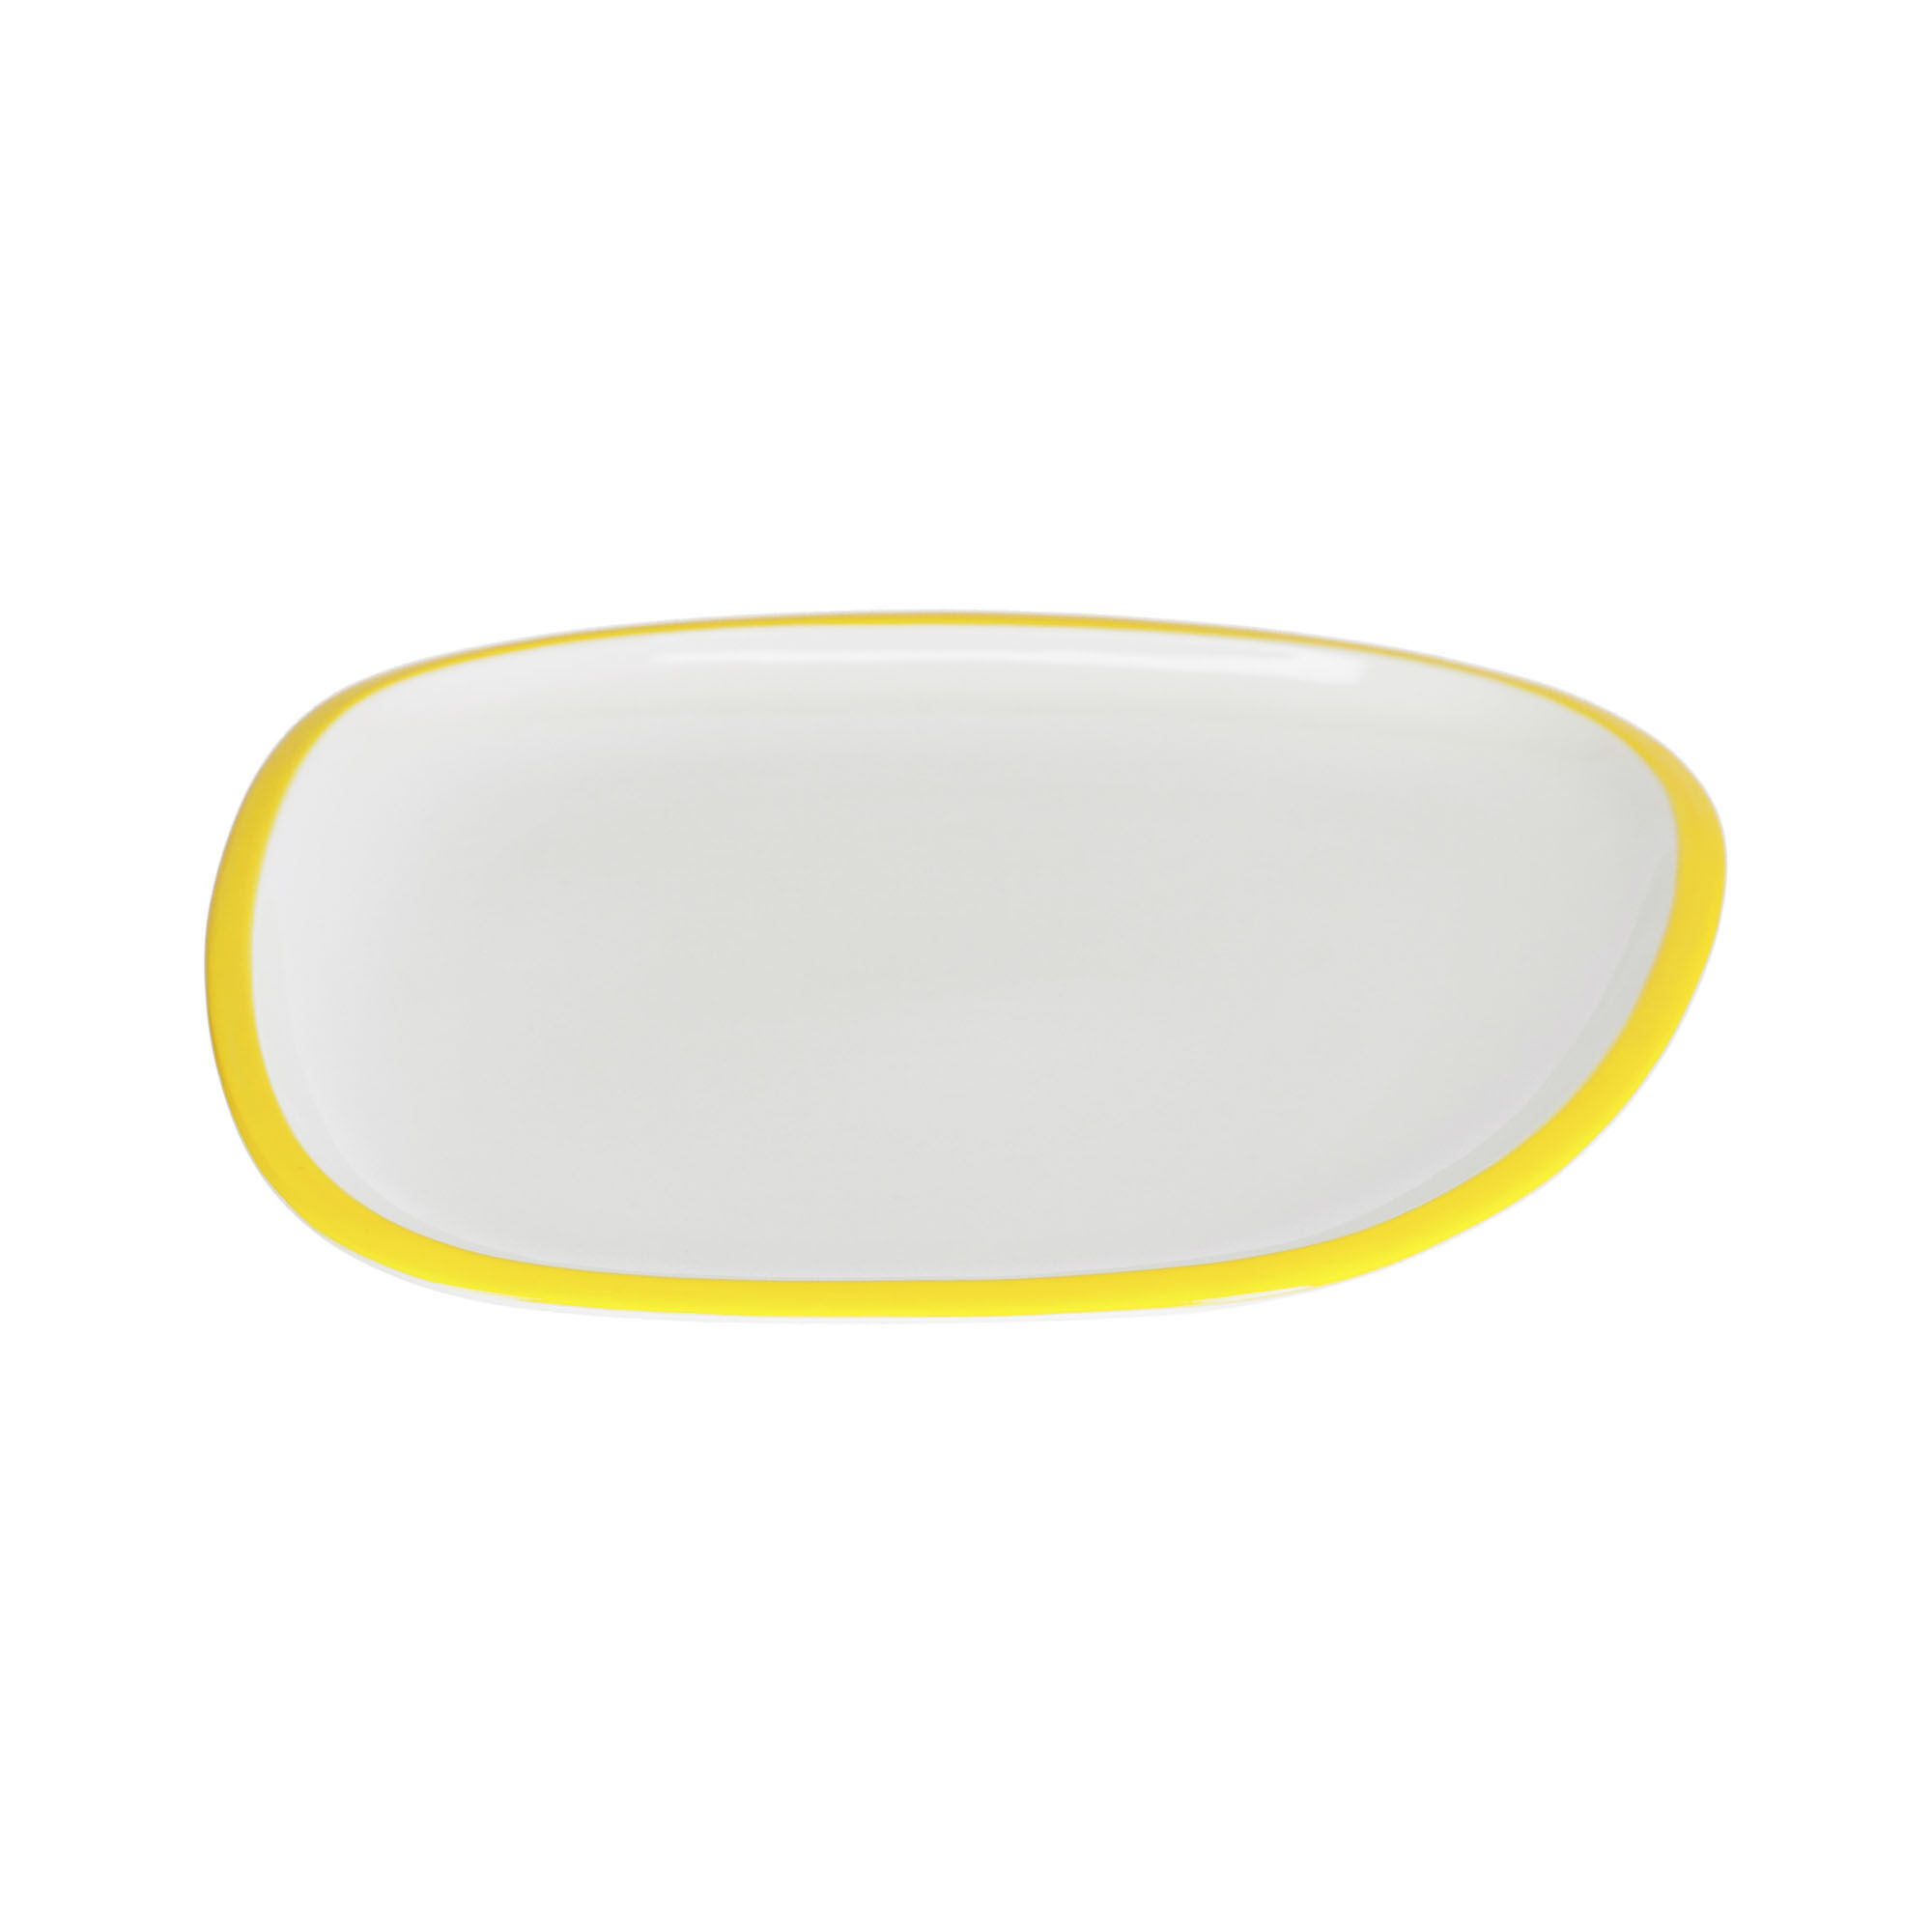 Kave Home Odalin porcelain dinner plate in yellow and white